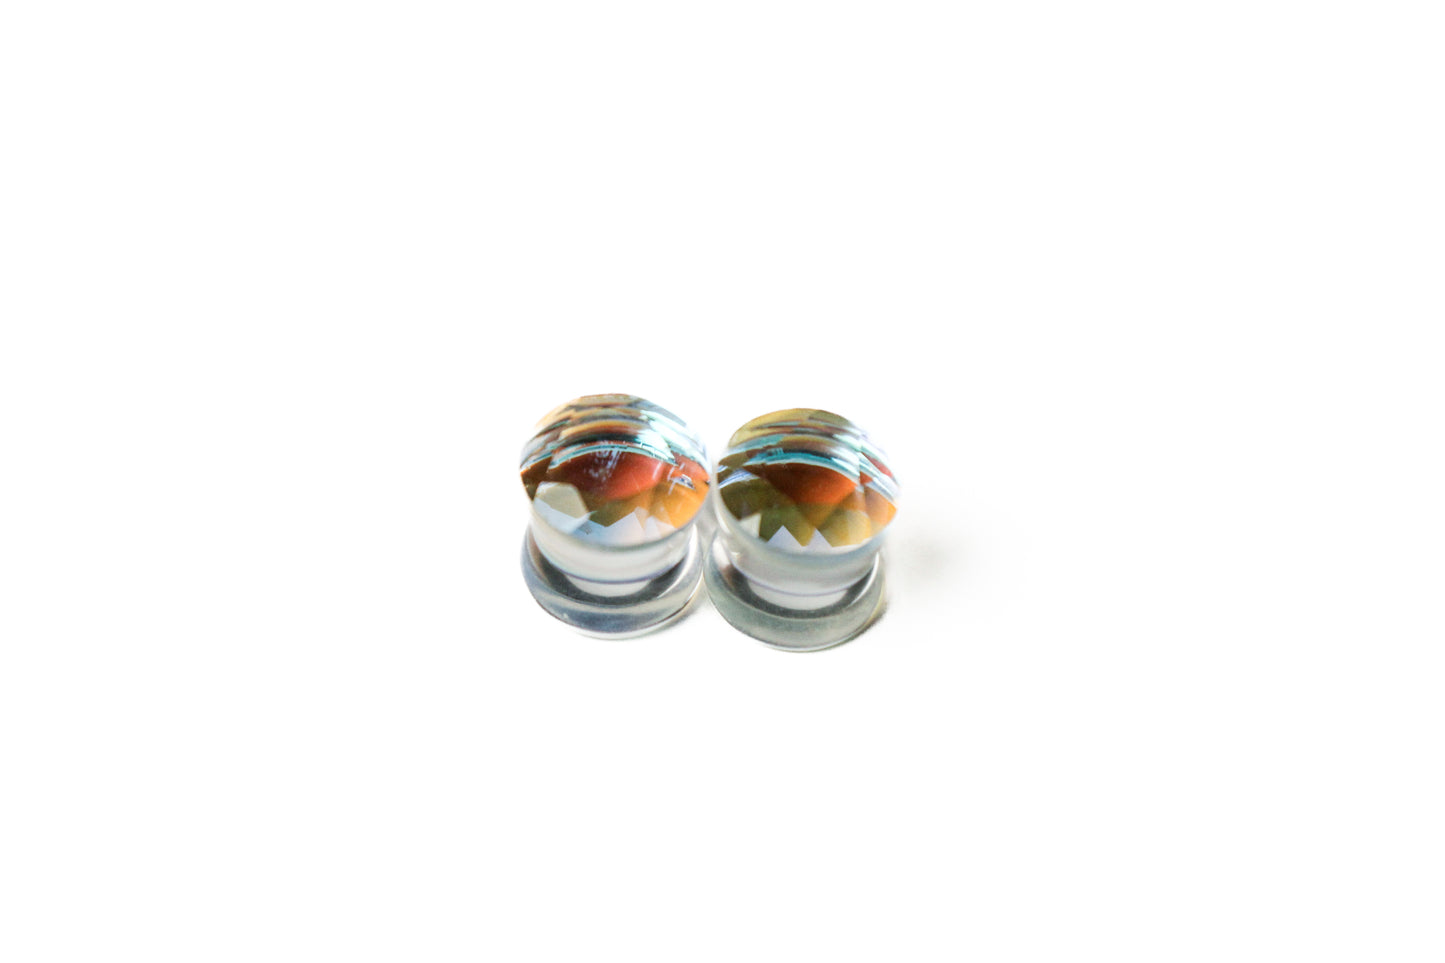 7/16" (11mm) - AB Glass Faceted Double Flare Plugs